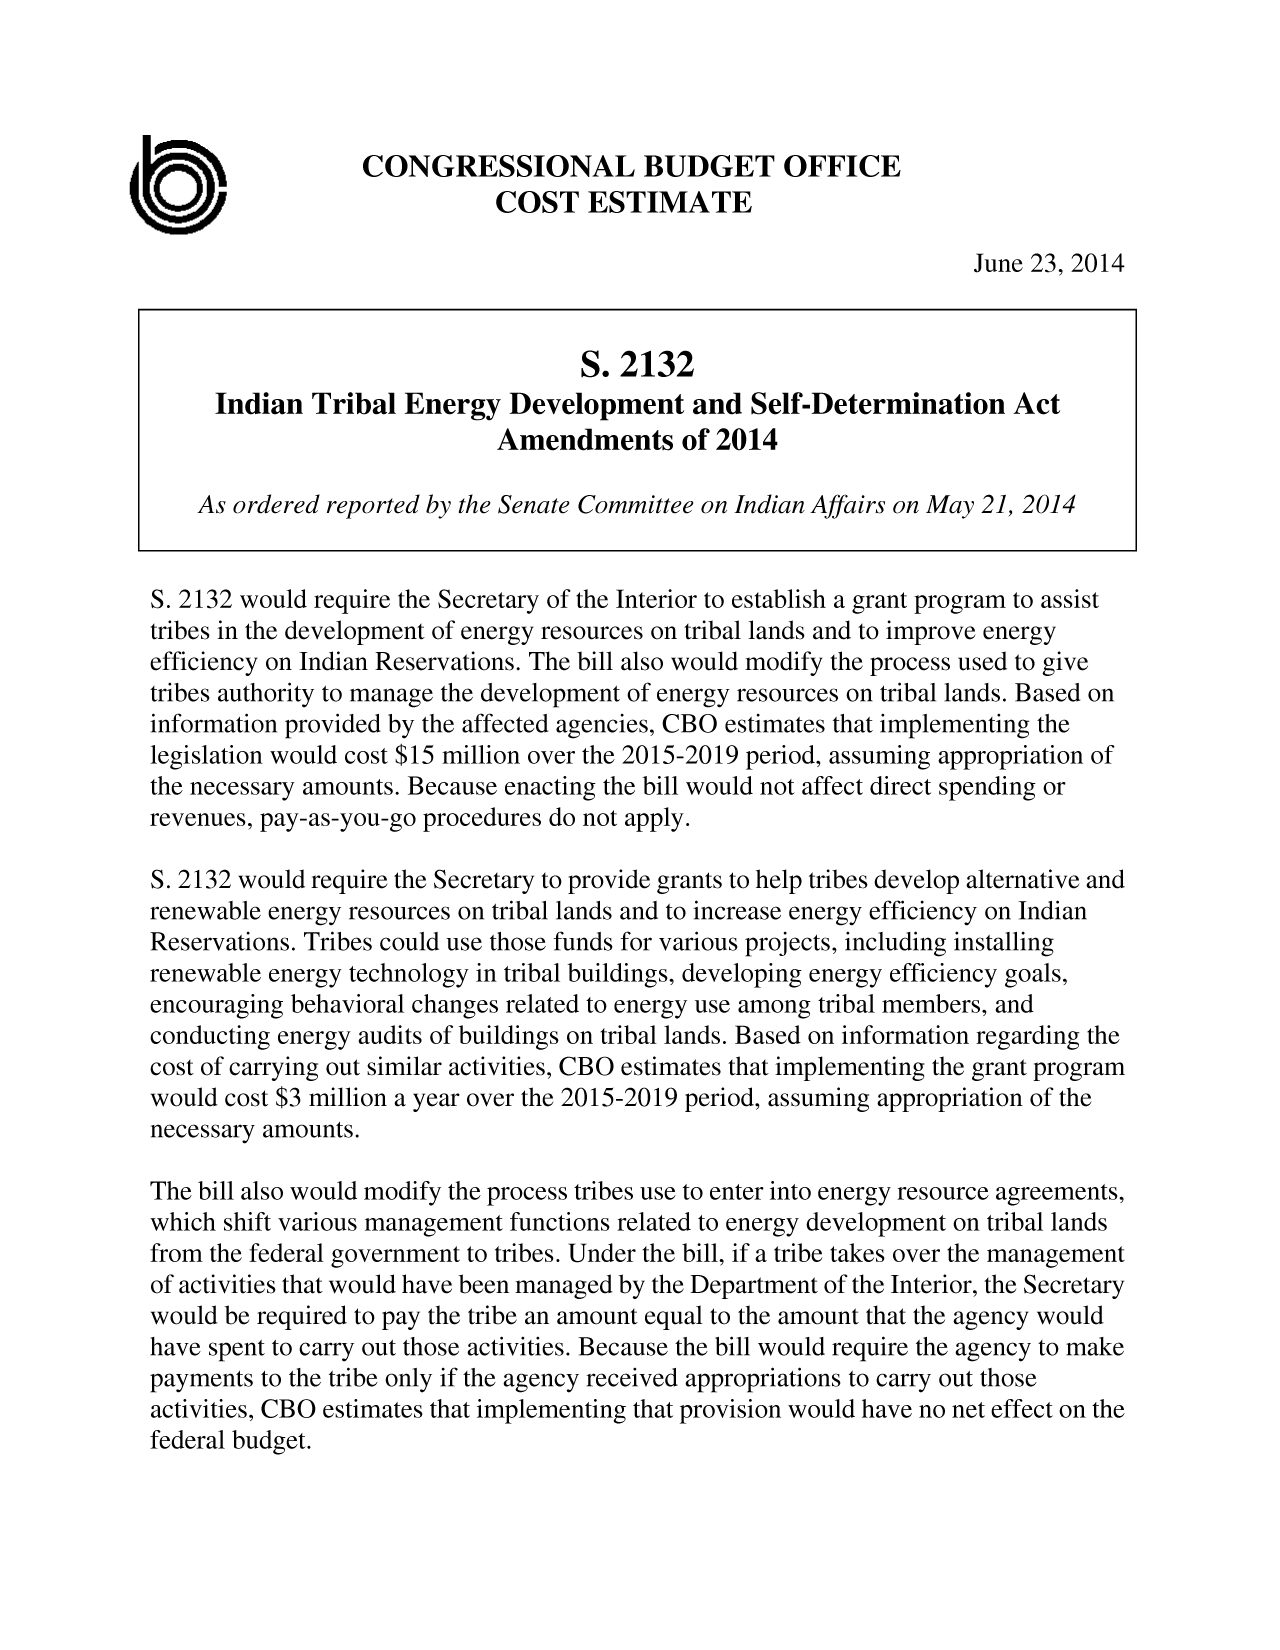 handle is hein.congrec/cbo1720 and id is 1 raw text is: CONGRESSIONAL BUDGET OFFICE
COST ESTIMATE
June 23, 2014
S. 2132
Indian Tribal Energy Development and Self-Determination Act
Amendments of 2014
As ordered reported by the Senate Committee on Indian Affairs on May 21, 2014
S. 2132 would require the Secretary of the Interior to establish a grant program to assist
tribes in the development of energy resources on tribal lands and to improve energy
efficiency on Indian Reservations. The bill also would modify the process used to give
tribes authority to manage the development of energy resources on tribal lands. Based on
information provided by the affected agencies, CBO estimates that implementing the
legislation would cost $15 million over the 2015-2019 period, assuming appropriation of
the necessary amounts. Because enacting the bill would not affect direct spending or
revenues, pay-as-you-go procedures do not apply.
S. 2132 would require the Secretary to provide grants to help tribes develop alternative and
renewable energy resources on tribal lands and to increase energy efficiency on Indian
Reservations. Tribes could use those funds for various projects, including installing
renewable energy technology in tribal buildings, developing energy efficiency goals,
encouraging behavioral changes related to energy use among tribal members, and
conducting energy audits of buildings on tribal lands. Based on information regarding the
cost of carrying out similar activities, CBO estimates that implementing the grant program
would cost $3 million a year over the 2015-2019 period, assuming appropriation of the
necessary amounts.
The bill also would modify the process tribes use to enter into energy resource agreements,
which shift various management functions related to energy development on tribal lands
from the federal government to tribes. Under the bill, if a tribe takes over the management
of activities that would have been managed by the Department of the Interior, the Secretary
would be required to pay the tribe an amount equal to the amount that the agency would
have spent to carry out those activities. Because the bill would require the agency to make
payments to the tribe only if the agency received appropriations to carry out those
activities, CBO estimates that implementing that provision would have no net effect on the
federal budget.


